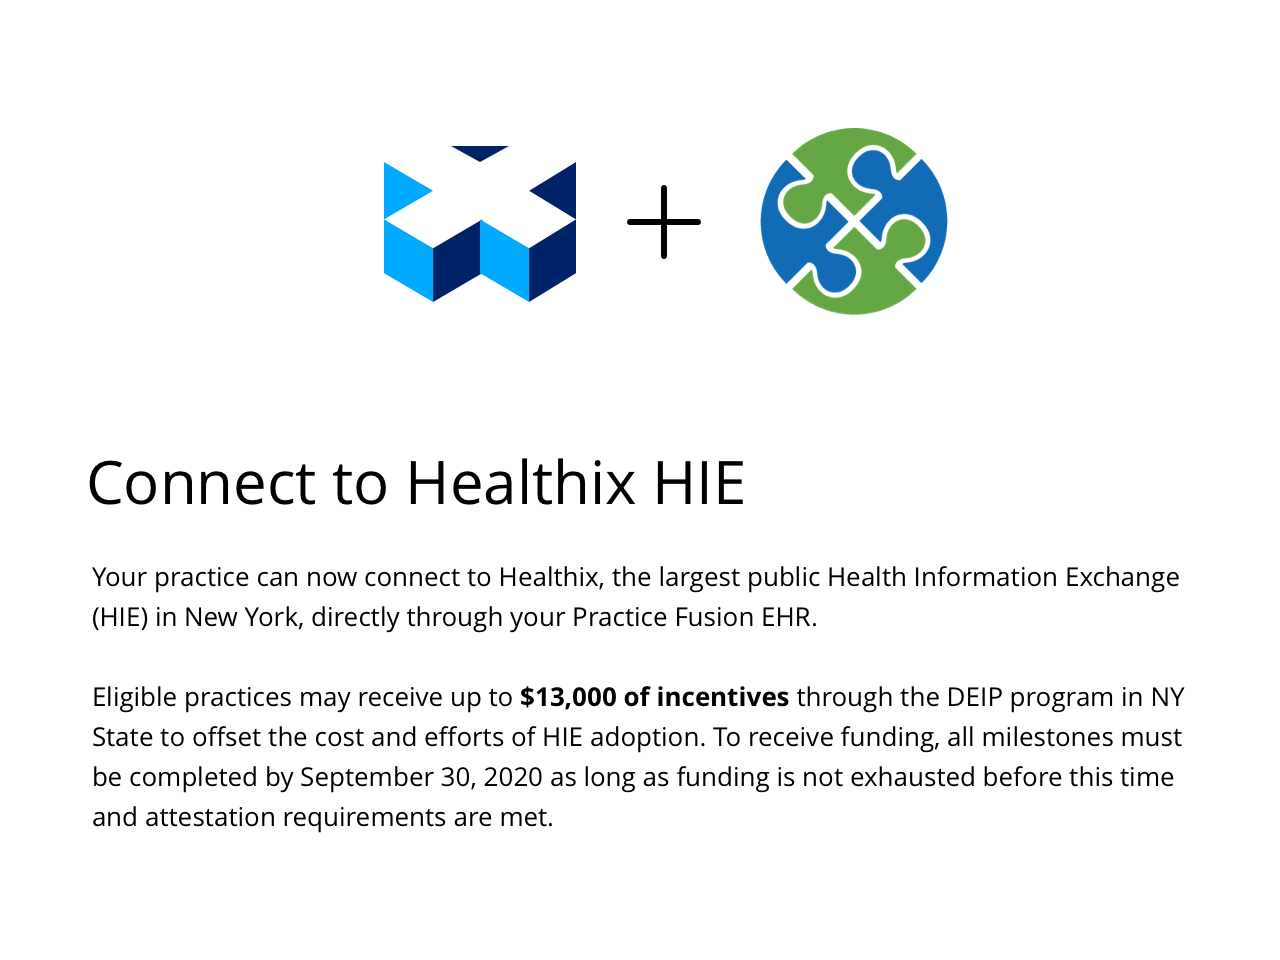 Your practice can now connect to Healthix, the largest public Health Information Exchange (HIE) in New York, directly through your Practice Fusion EHR